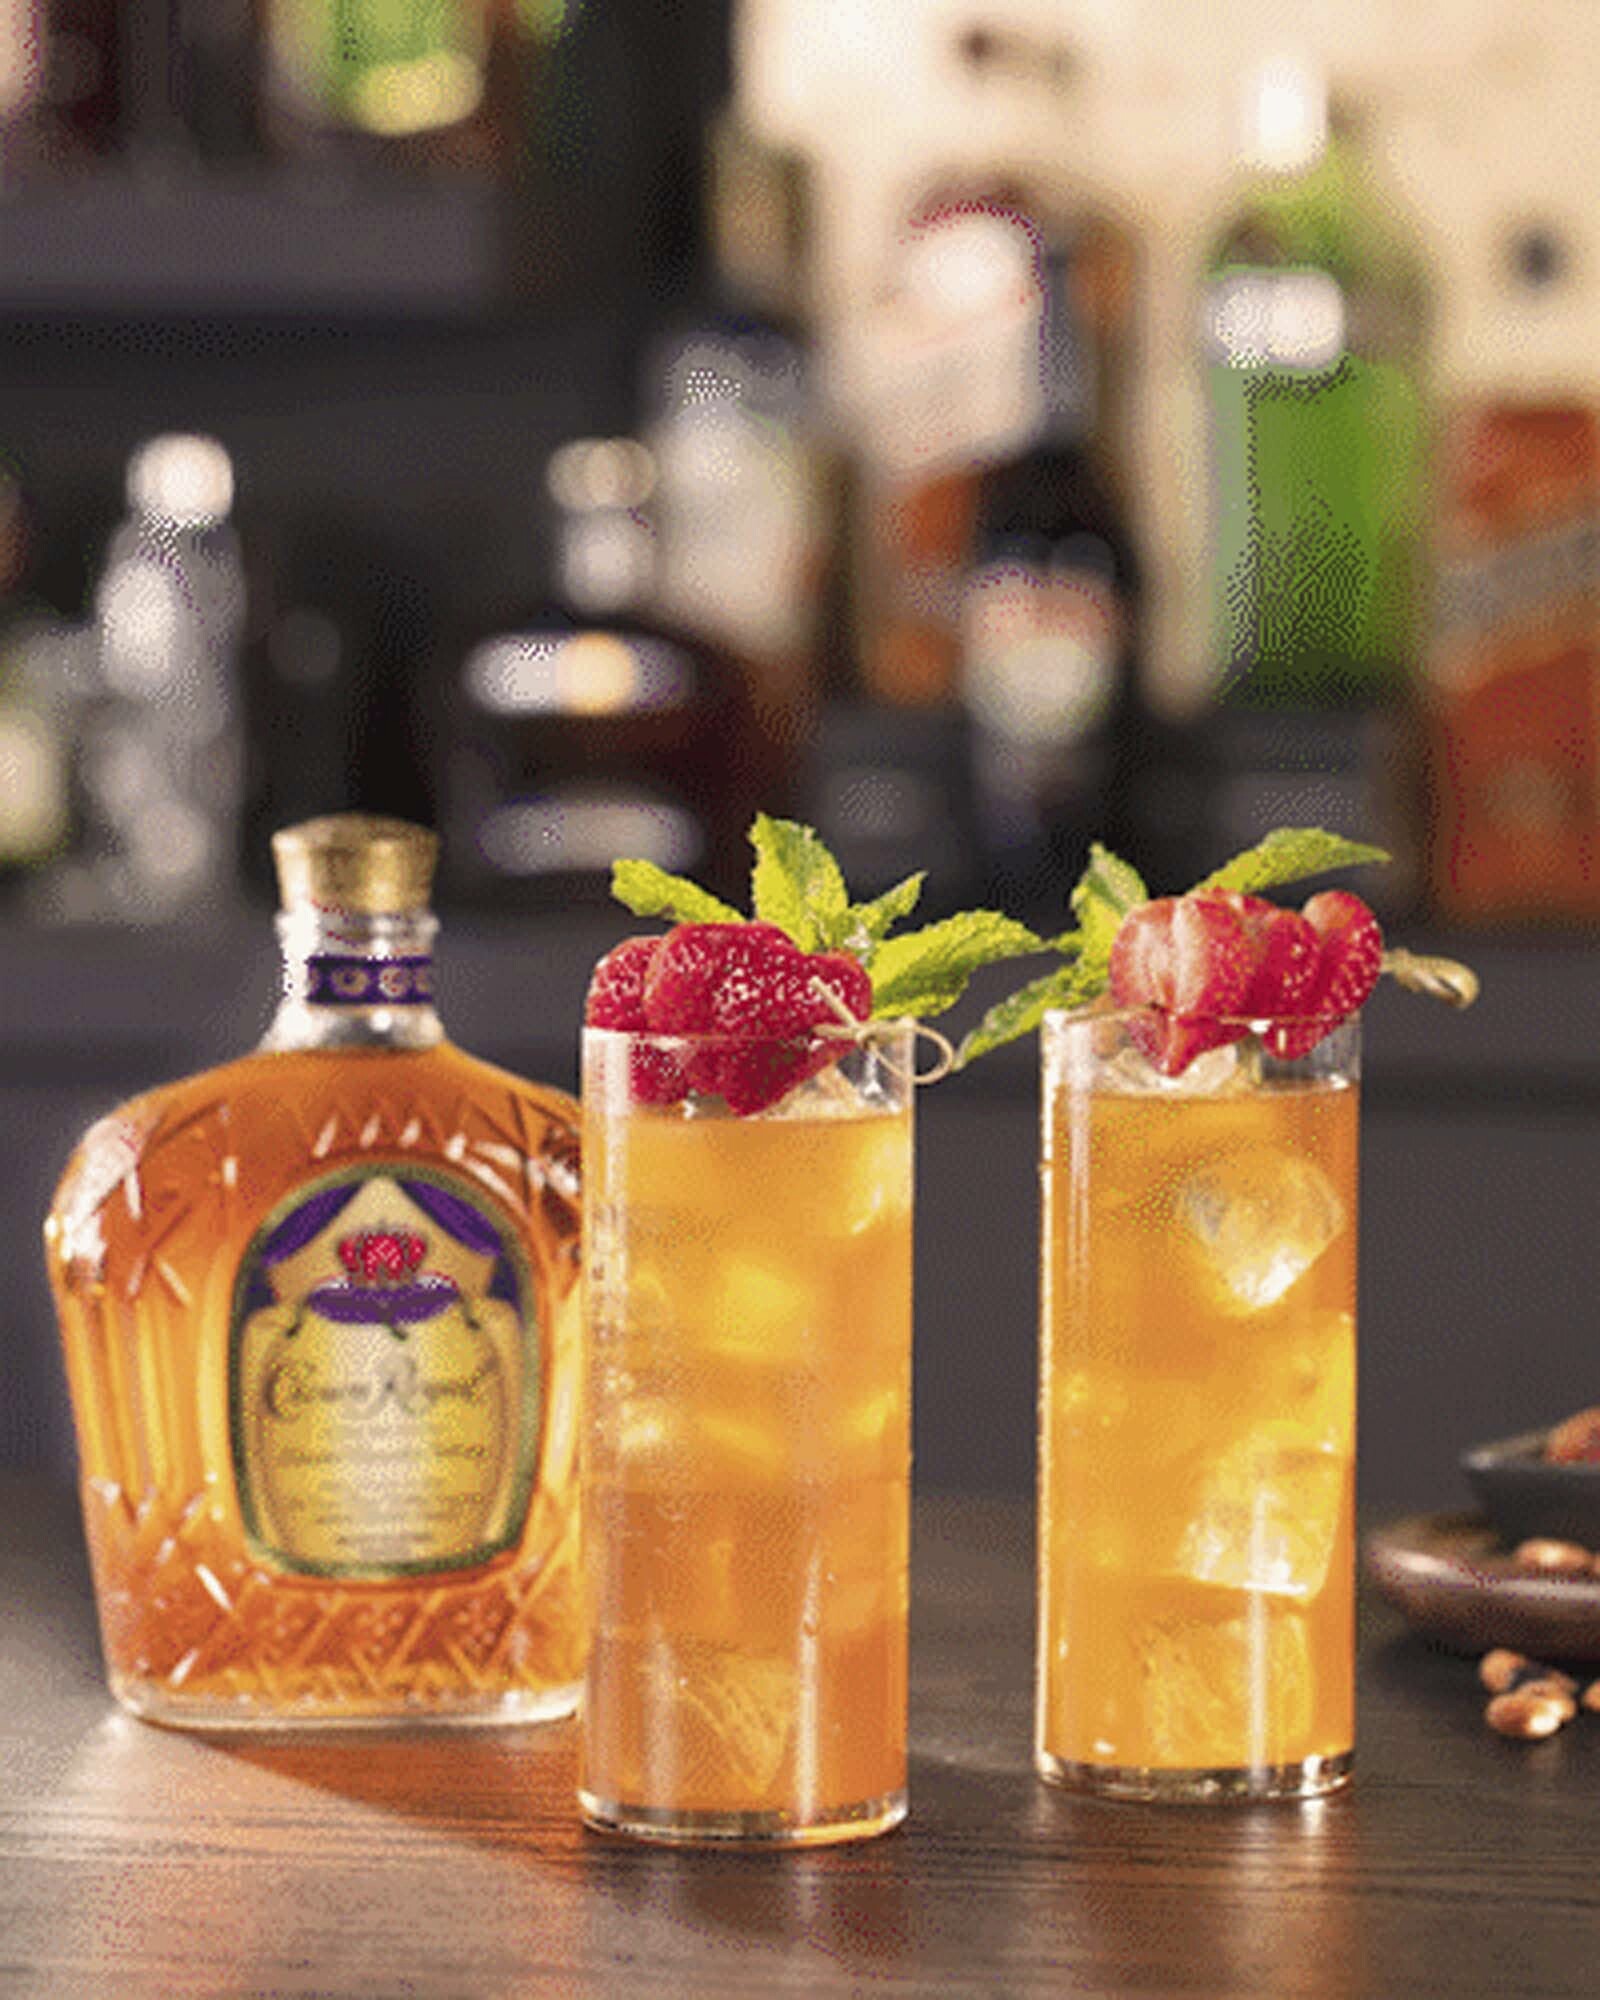 Crown Royal Strawberry Mint iced Tea Whisky Cocktail